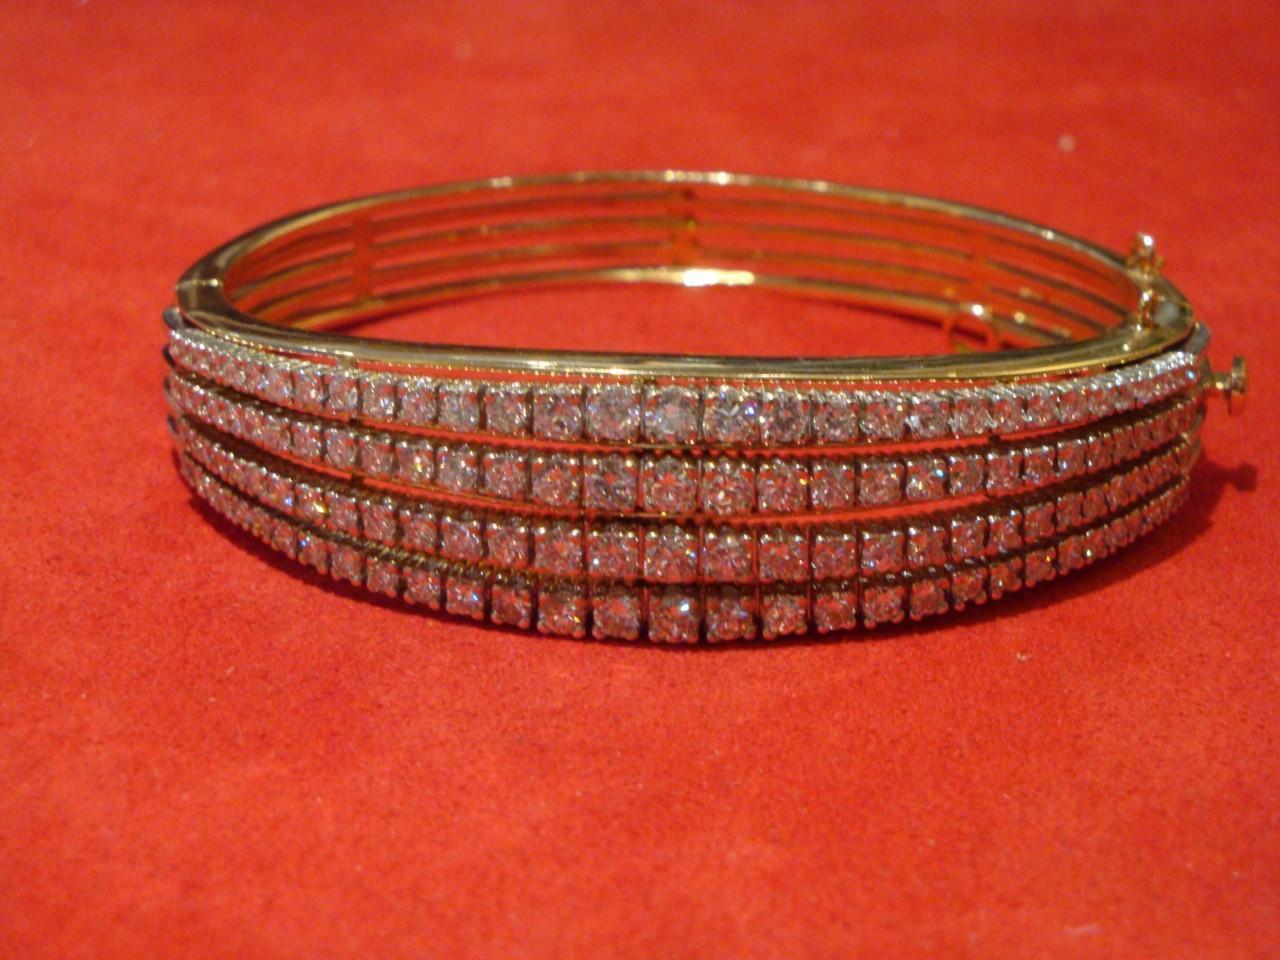 The Following Item we are offering is this Rare 14KT Yellow Gold and Diamond Bangle Bracelet, in a graduated four row design containing 124 round brilliant cut diamonds weighing approximately 5.00 carats total, hinged bangle design. 30.10 dwts. An